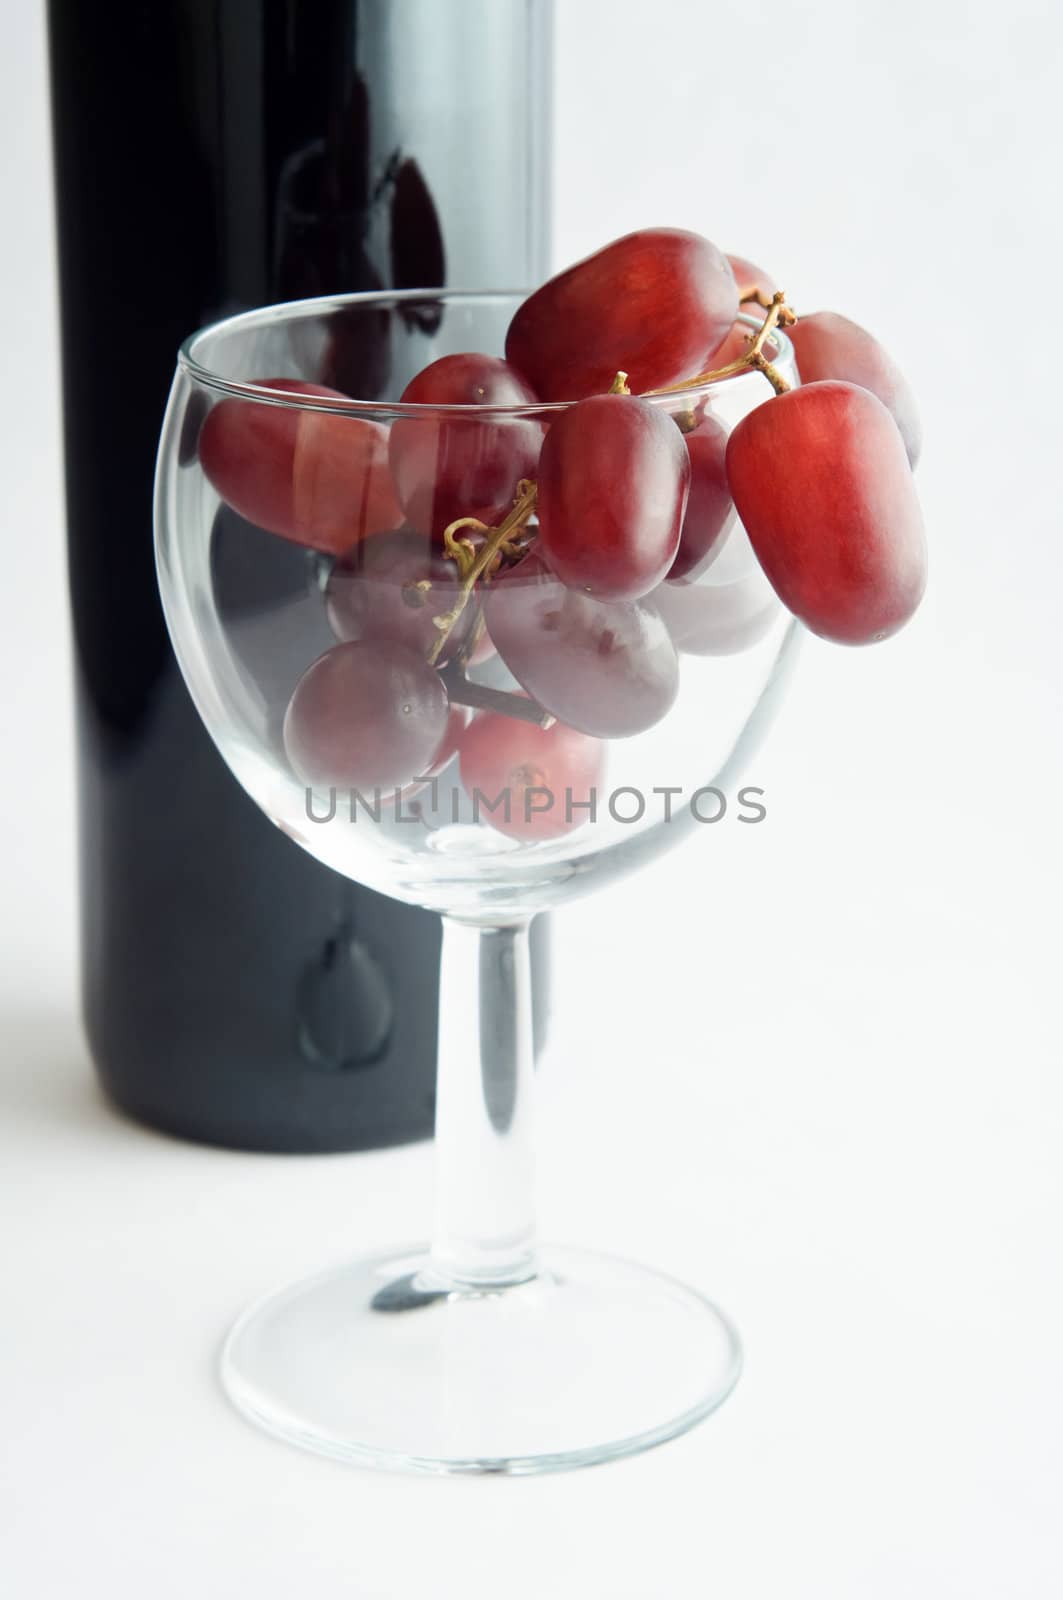 A wine glass filled with red grapes in front of a bottle of red wine.  Portrait (vertical) orientation.